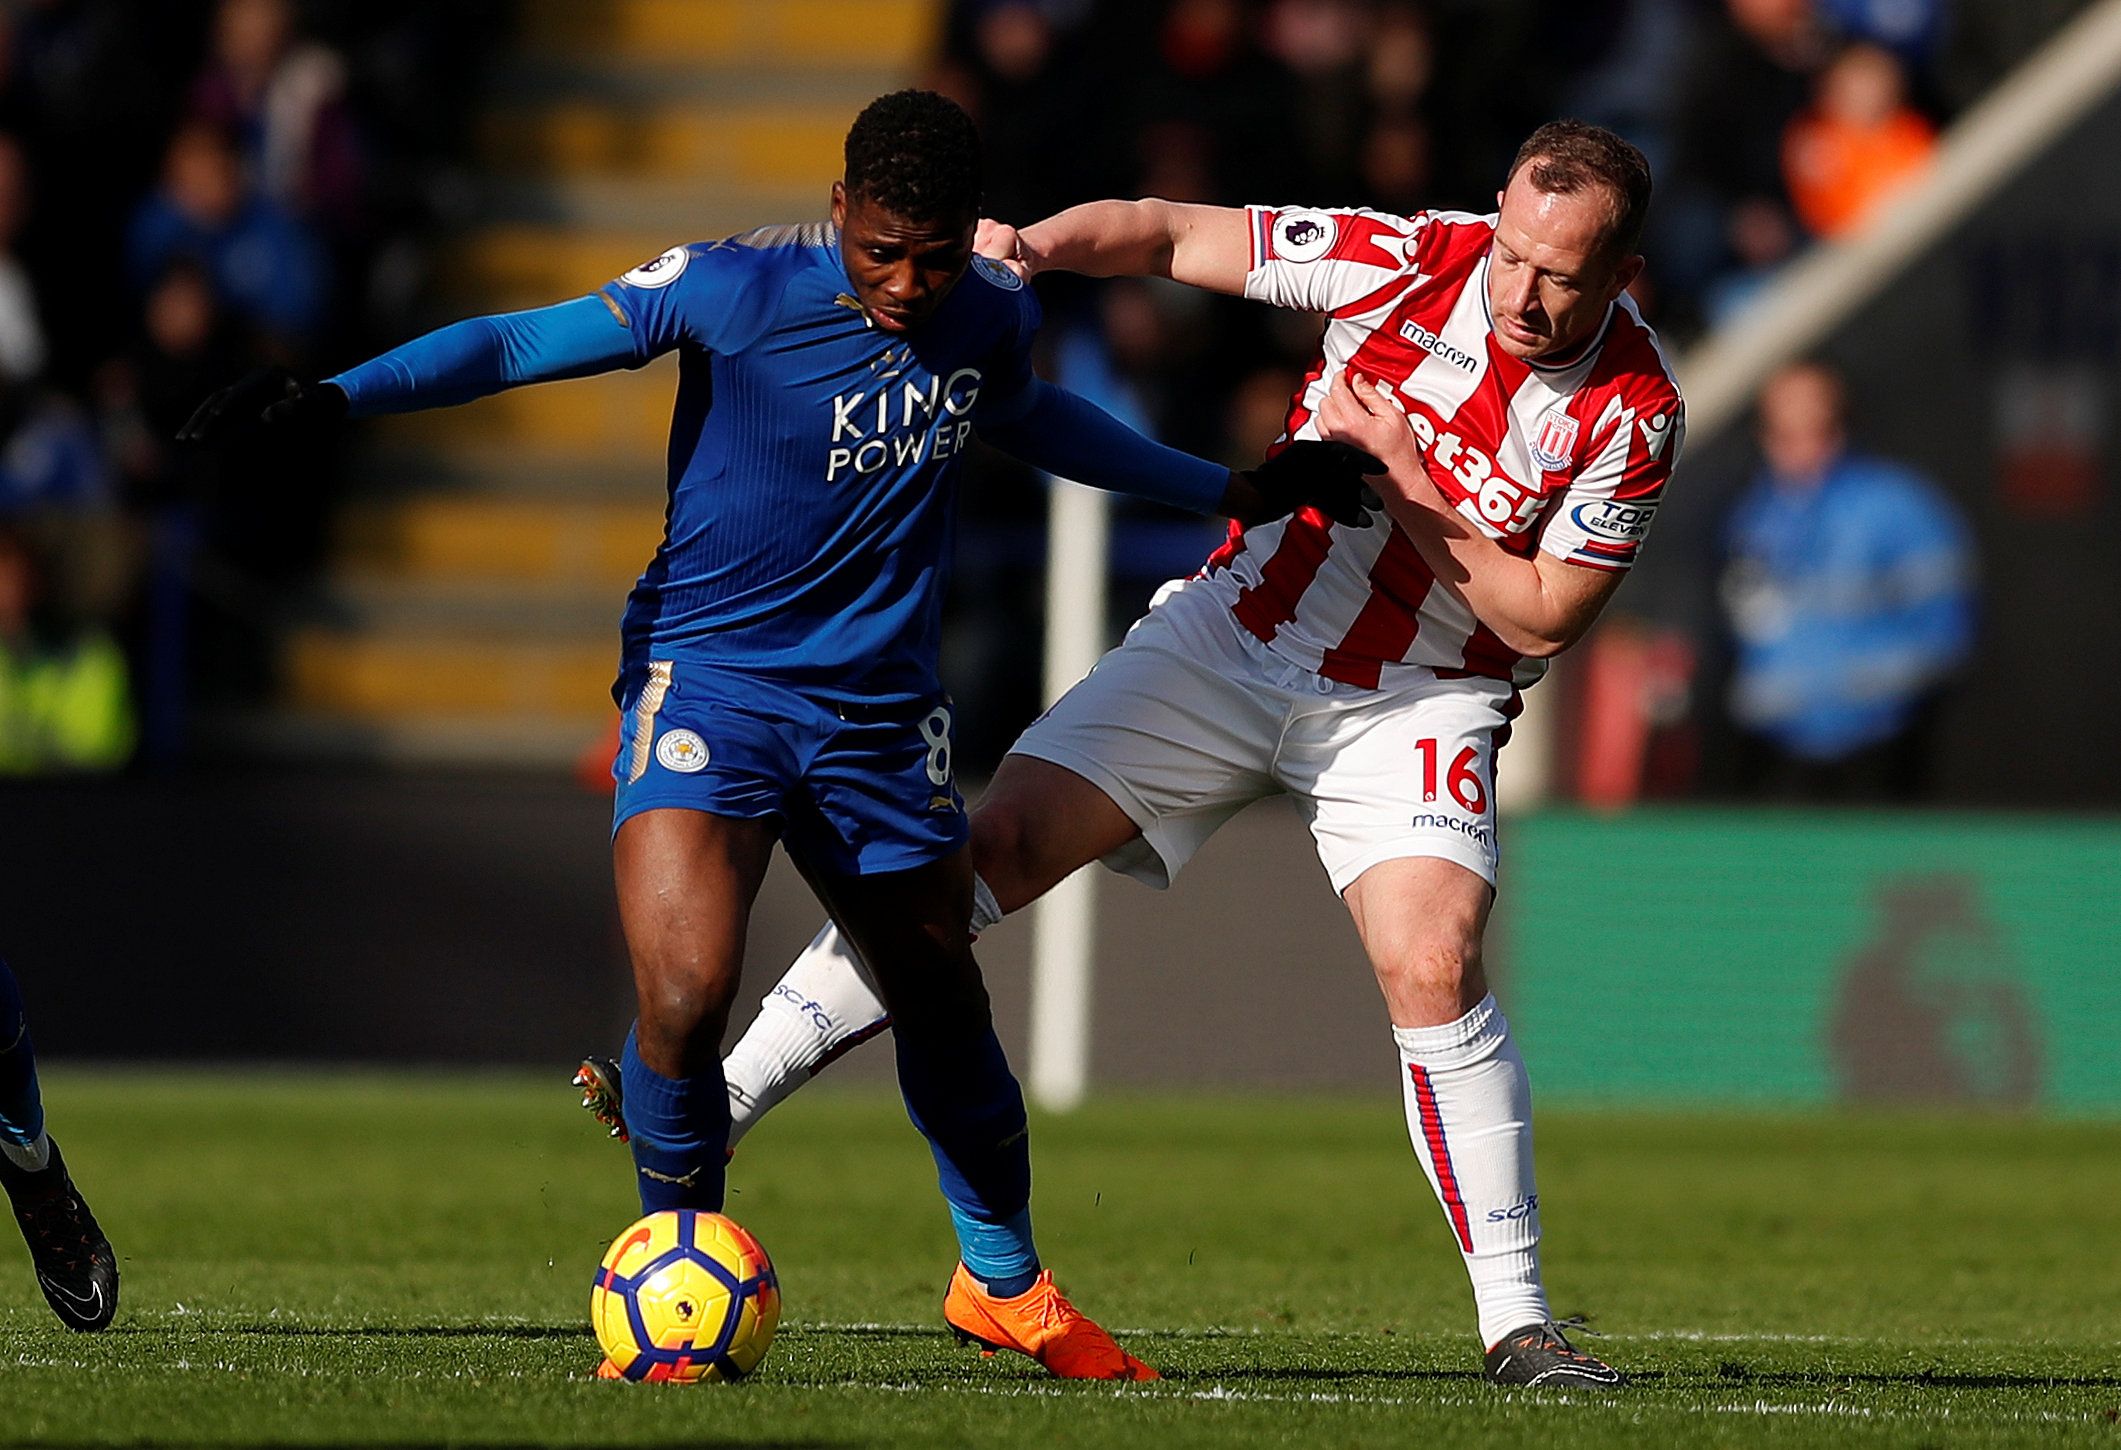 Soccer Football - Premier League - Leicester City vs Stoke City - King Power Stadium, Leicester, Britain - February 24, 2018   Leicester City's Kelechi Iheanacho in action with Stoke City's Charlie Adam    Action Images via Reuters/Andrew Boyers    EDITORIAL USE ONLY. No use with unauthorized audio, video, data, fixture lists, club/league logos or 